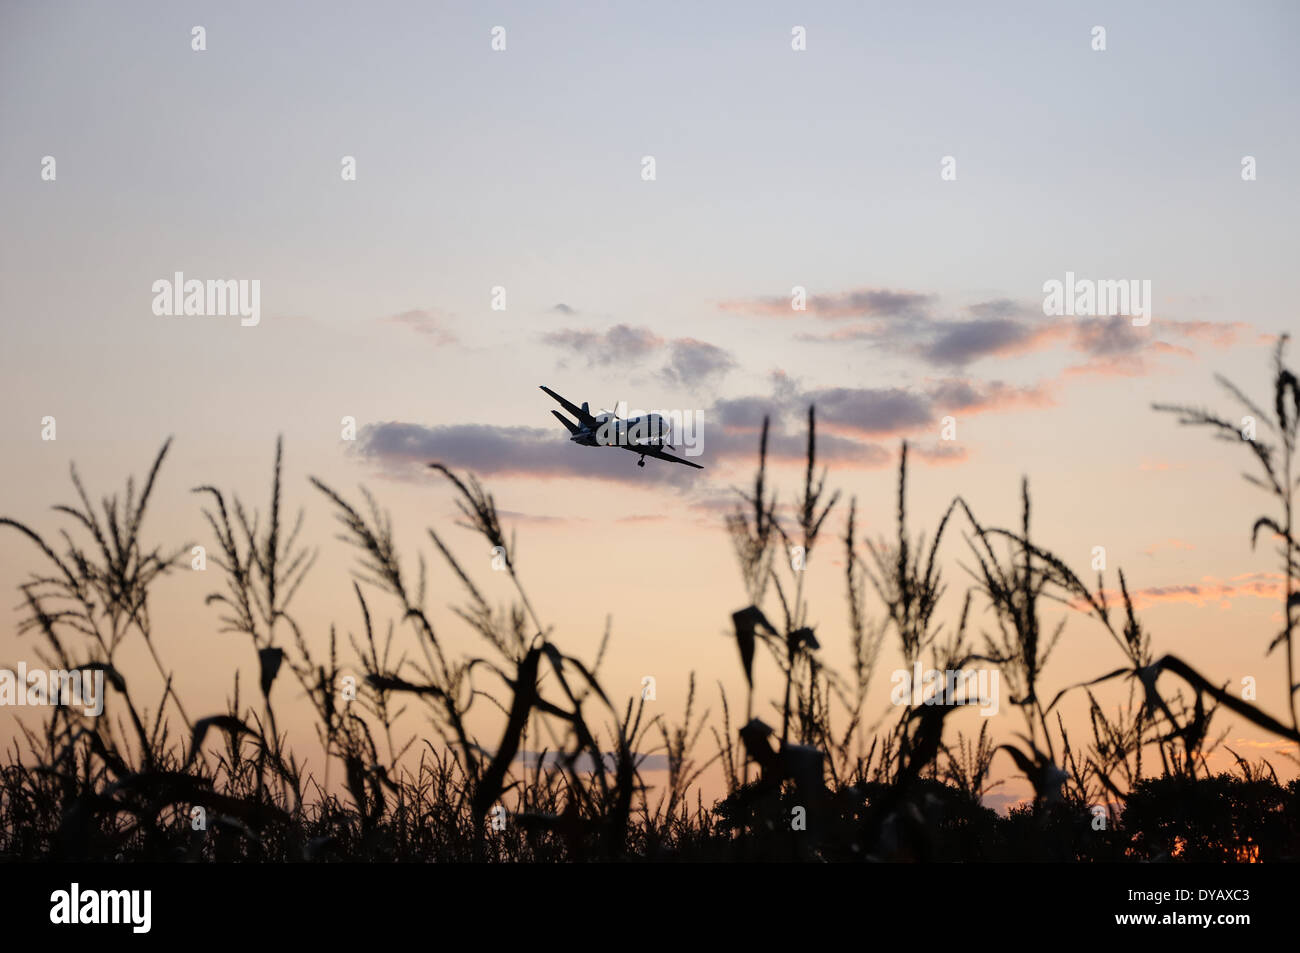 Airplane in bright evening sky above corn field Stock Photo